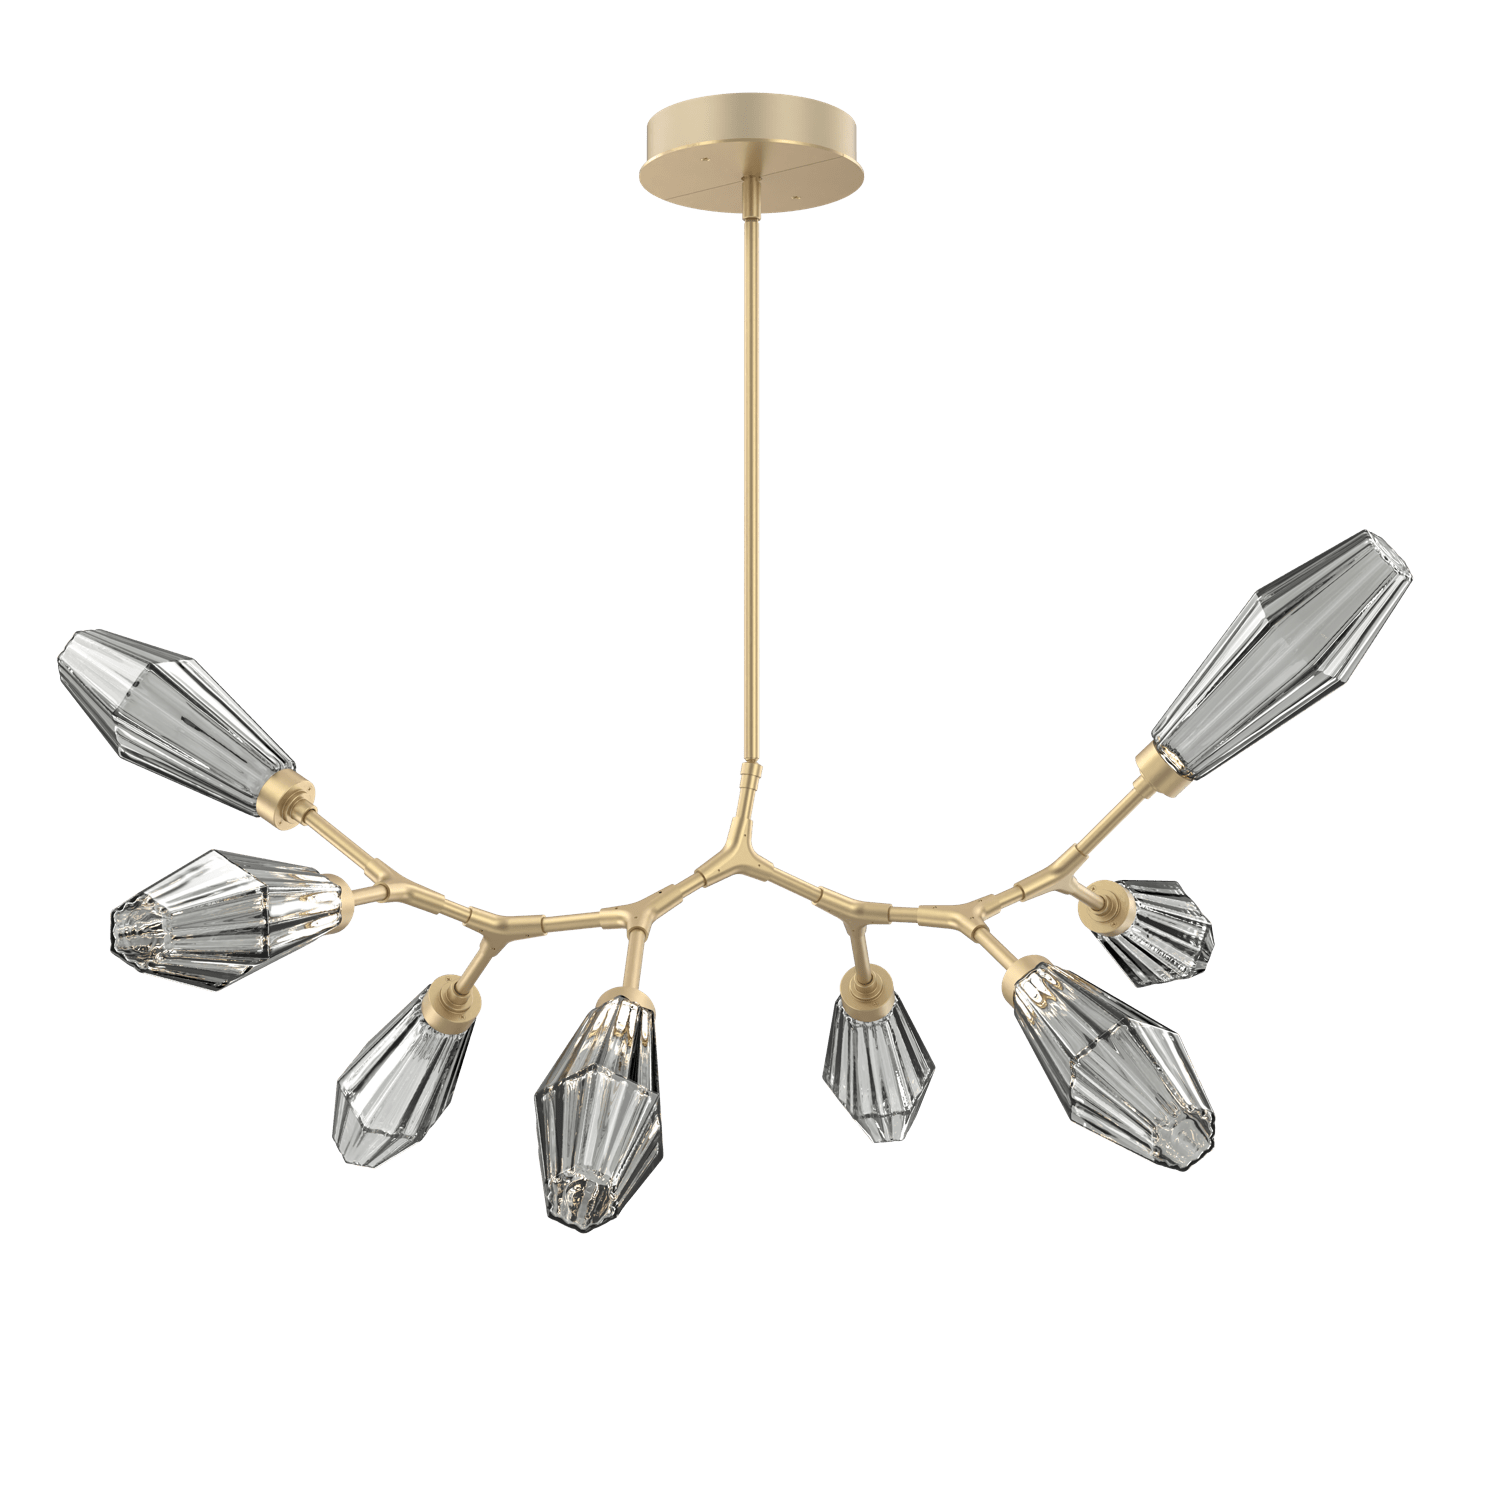 PLB0049-BB-GB-RS-Hammerton-Studio-Aalto-8-light-modern-branch-chandelier-with-gilded-brass-finish-and-optic-ribbed-smoke-glass-shades-and-LED-lamping